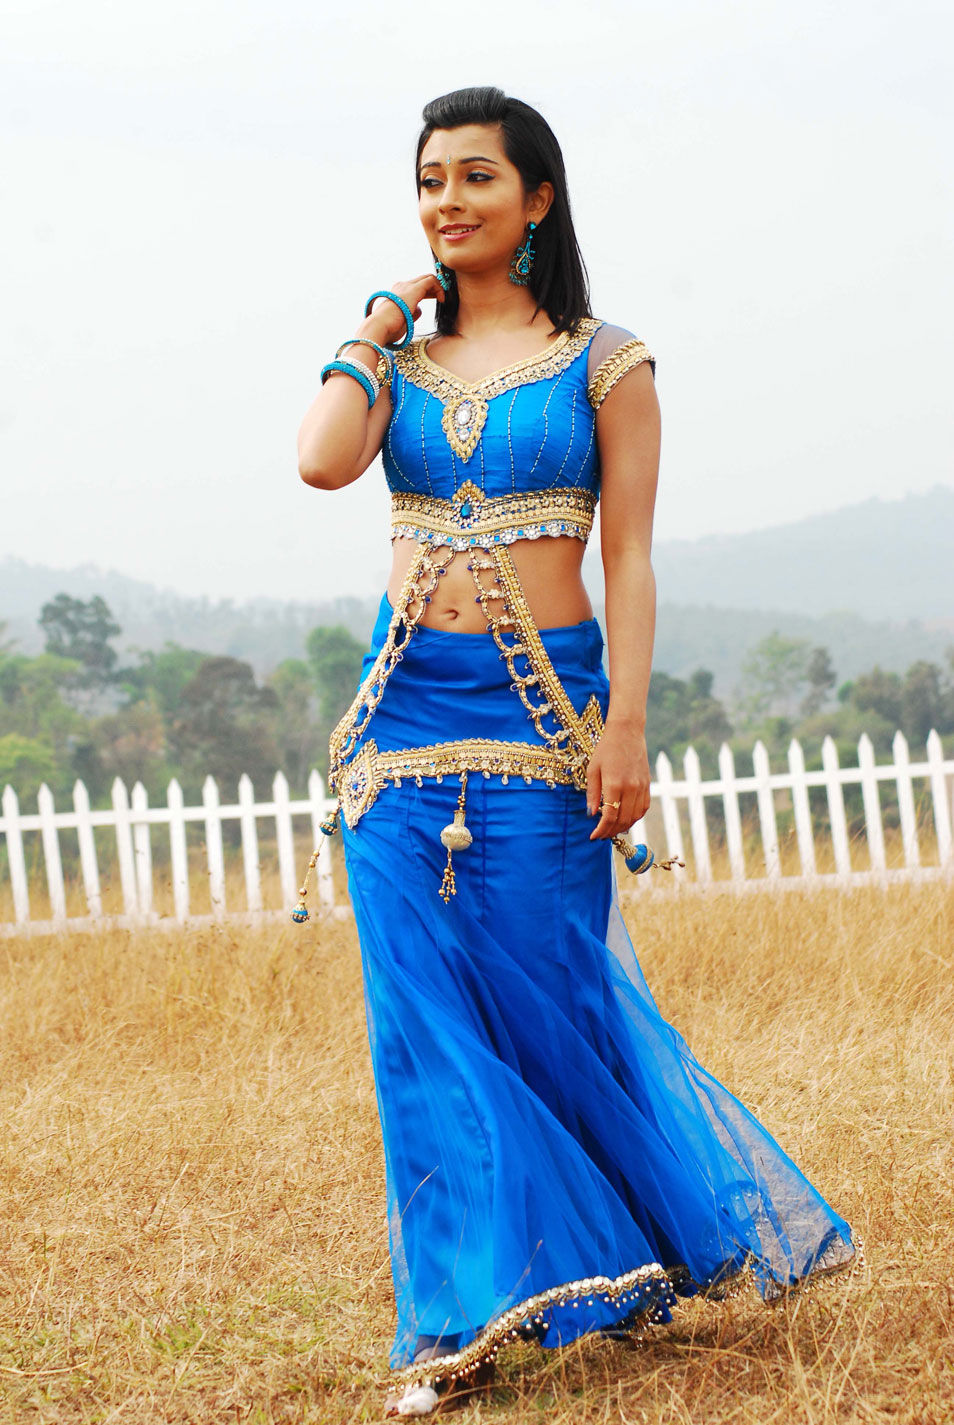 Radhika Pandit Latest Spicy Hd Images Without Water Mark Beautiful Indian Actress Cute Photos